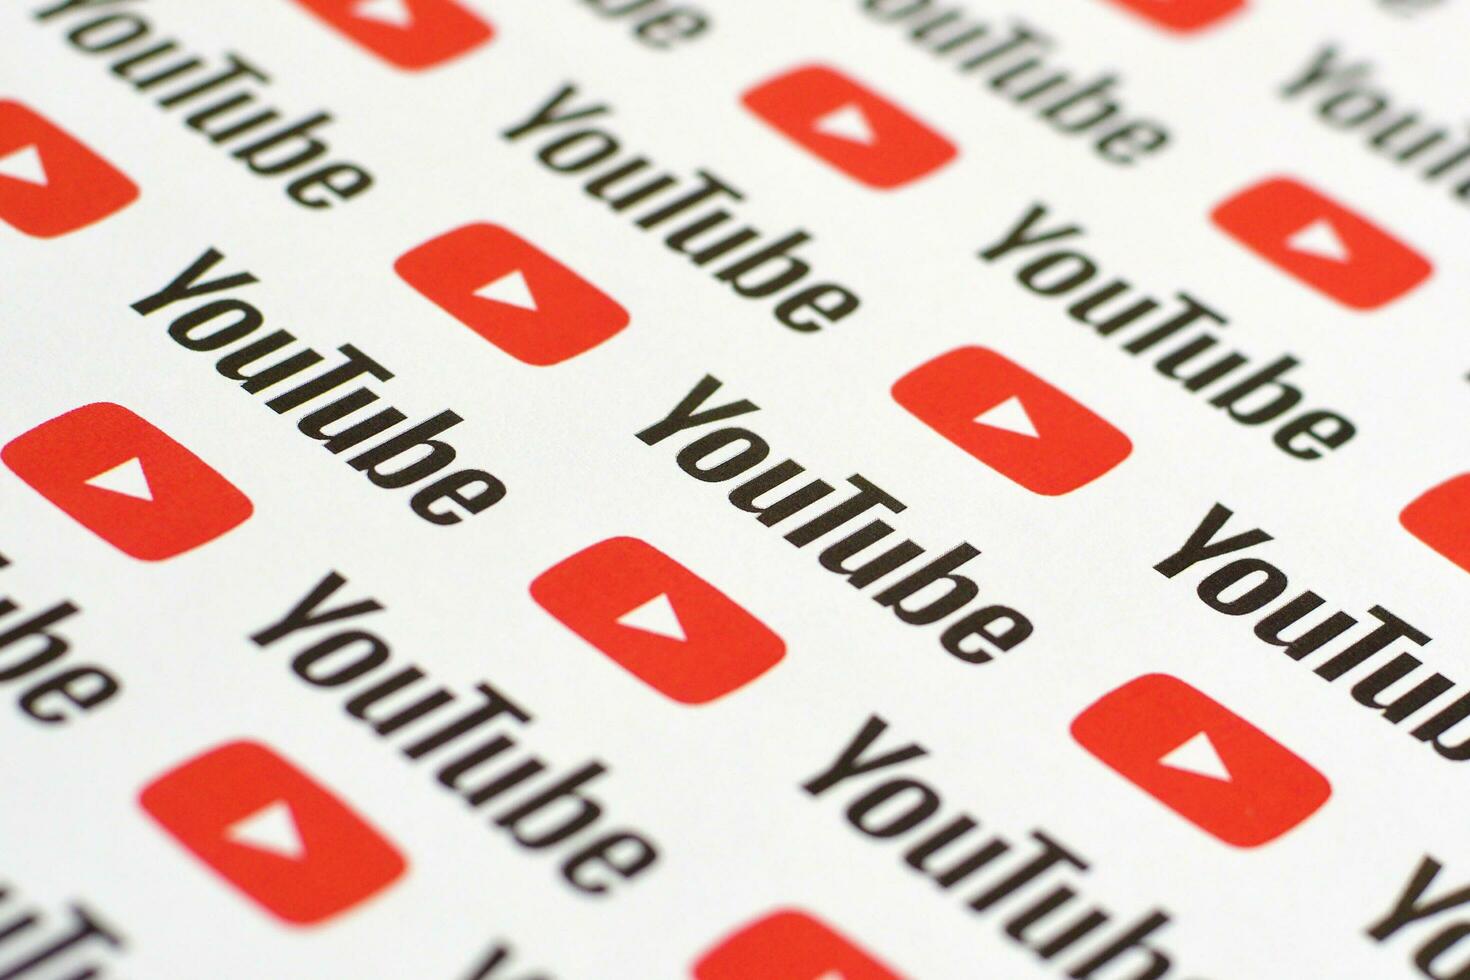 Youtube pattern printed on paper with small youtube logos and inscriptions. YouTube is Google subsidiary and American most popular video-sharing platform photo